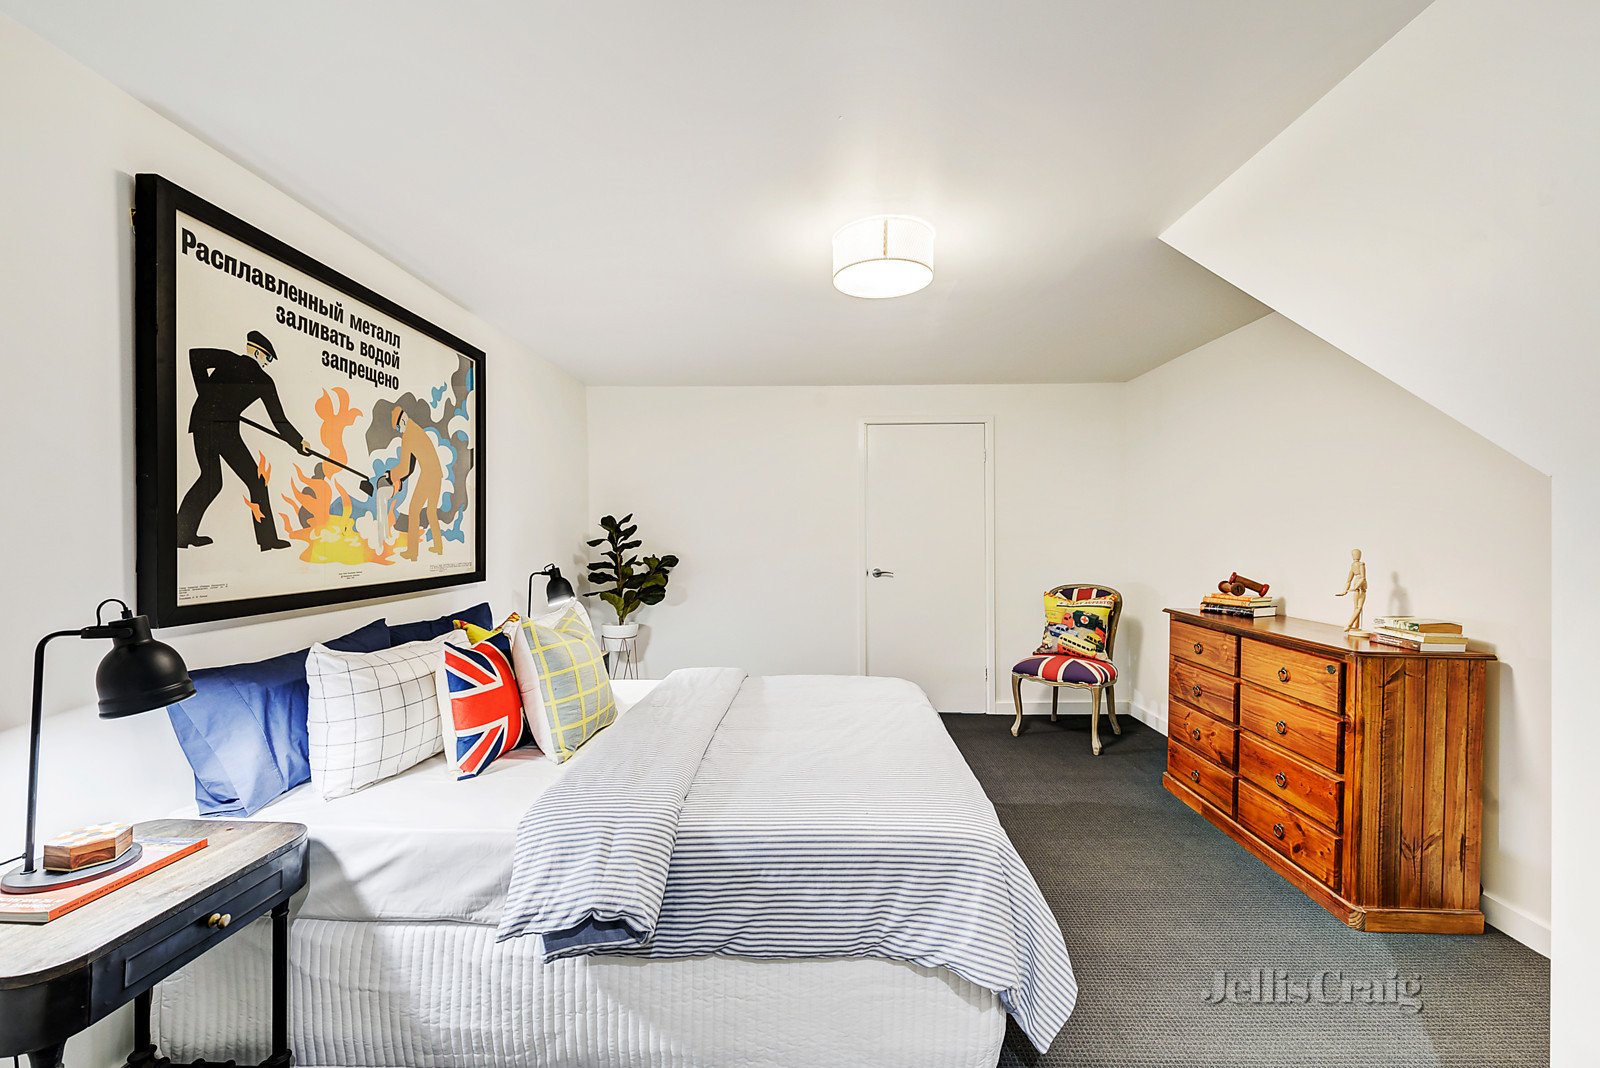 4/200 Noone Street, Clifton Hill image 6